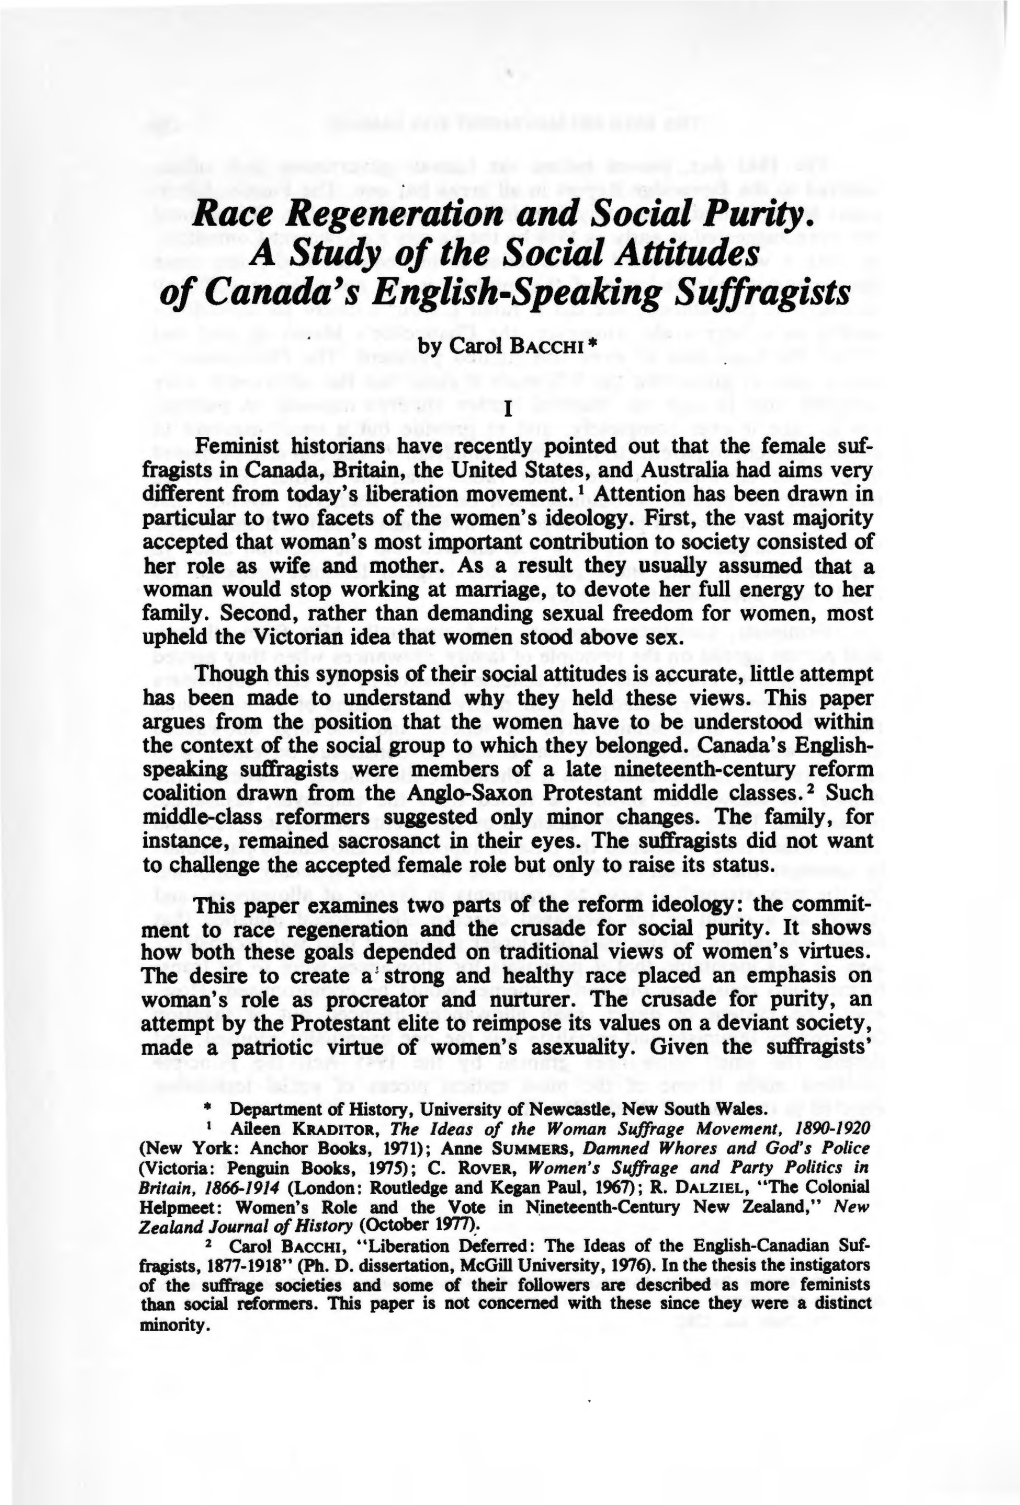 Race Regeneration and Social Purity. a Study of the Social Attitudes of Canada's English-Speaking Suffragists by Carol BACCHI*